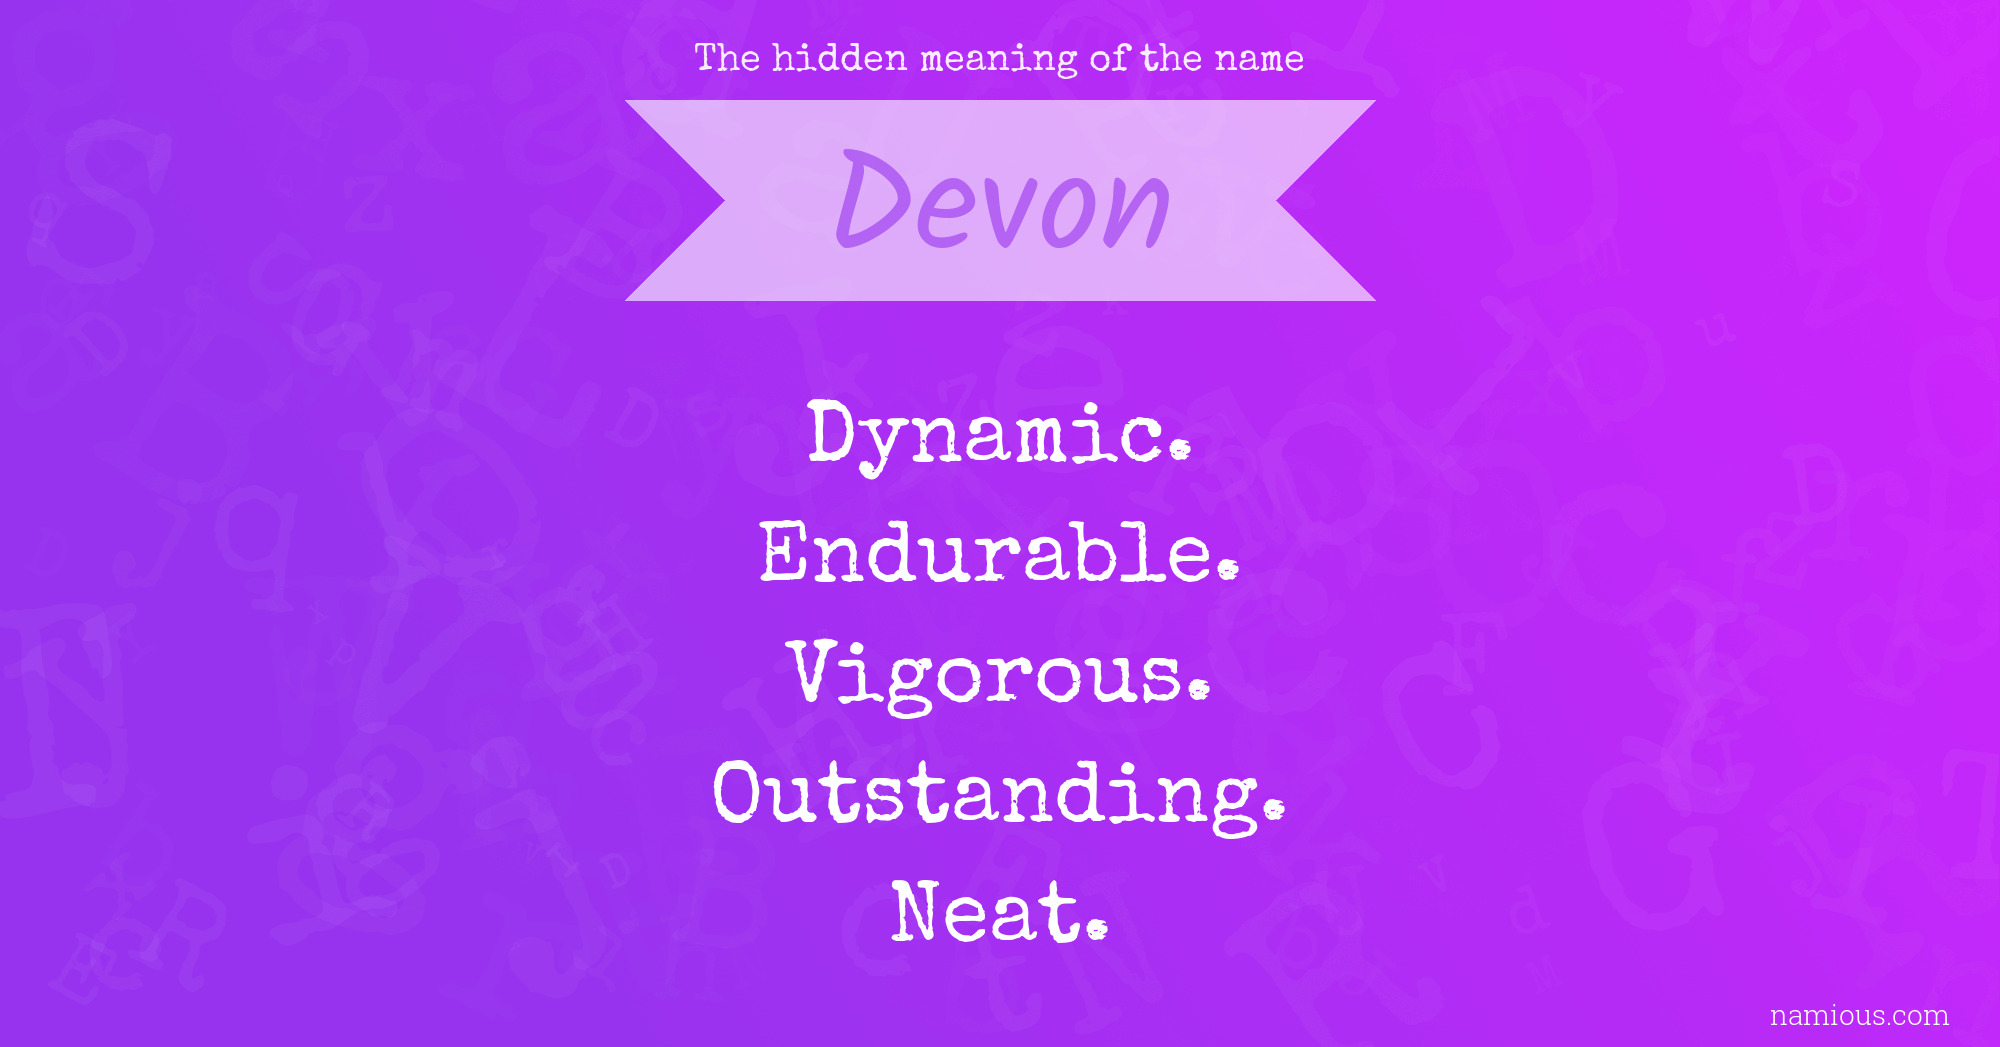 The hidden meaning of the name Devon